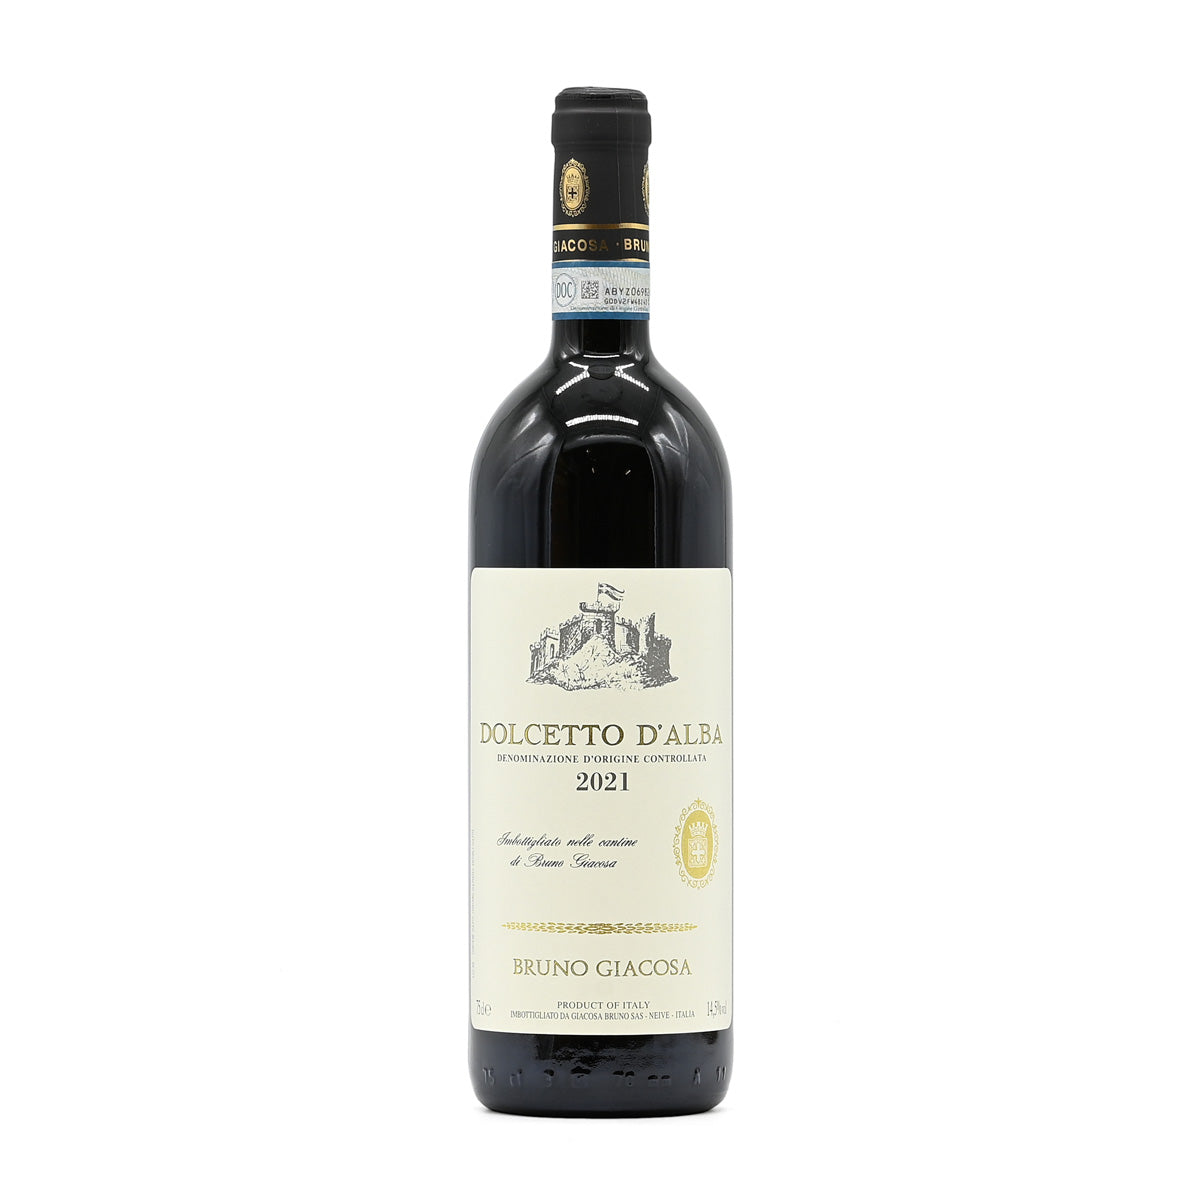 Bruno Giacosa Dolcetto d'Alba 2021, 750ml Italian red wine, made from Dolcetto, from Alba, Piedmont, Italy – GDV Fine Wines, Hong Kong